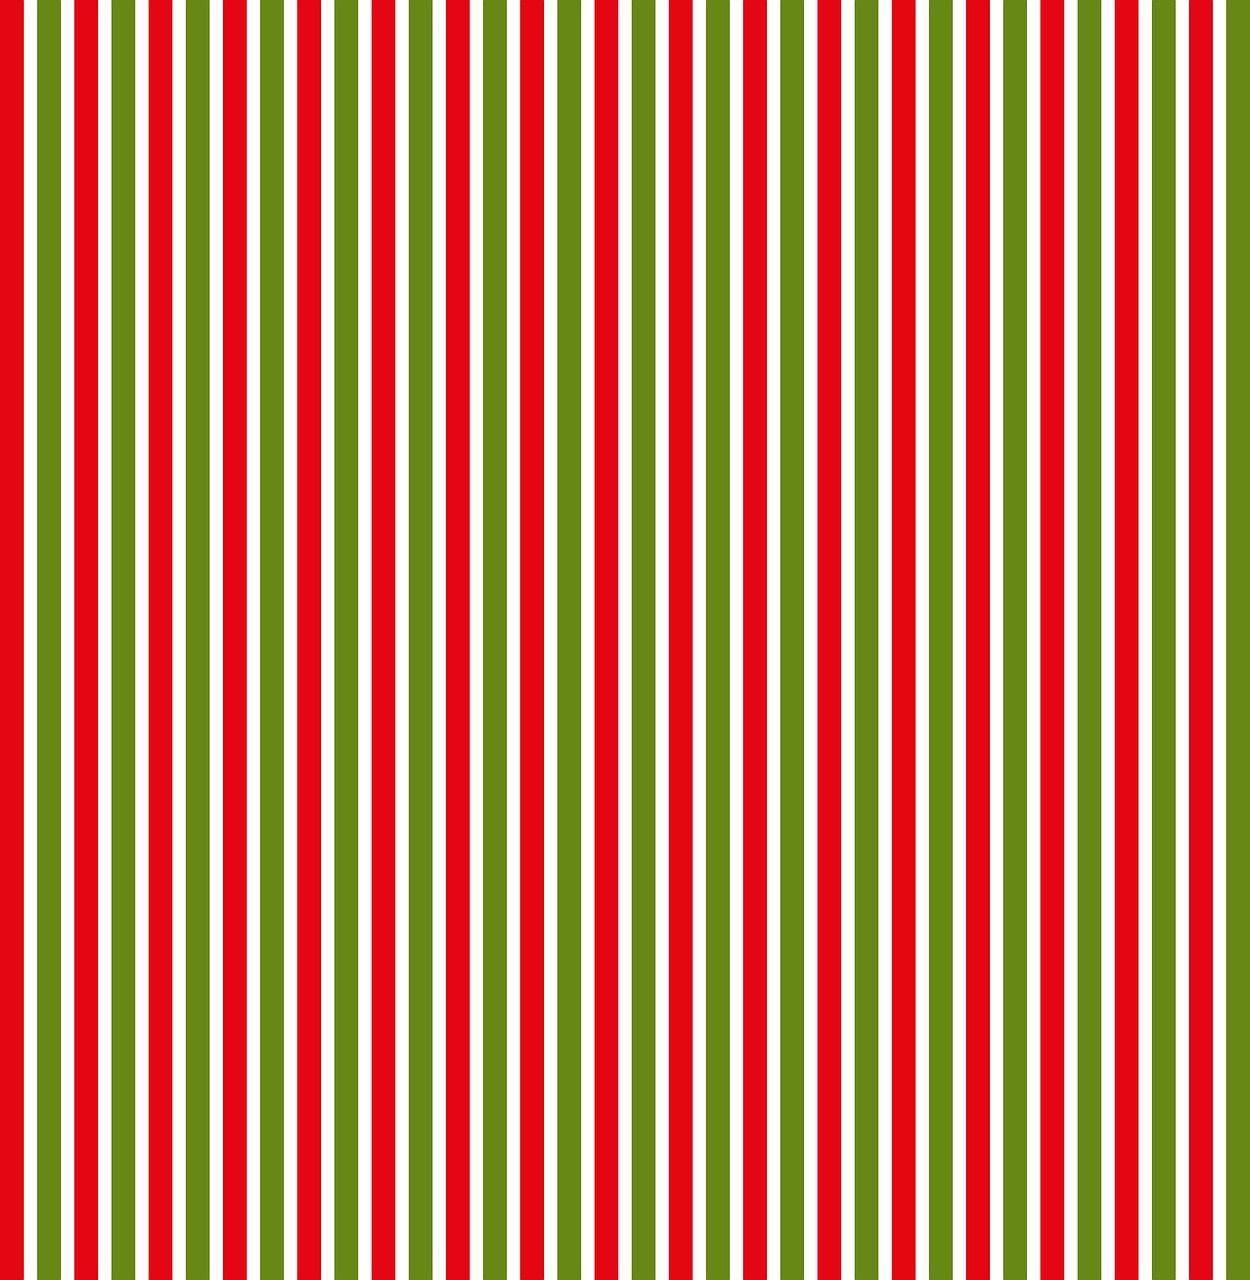 pattern background red white green free photo